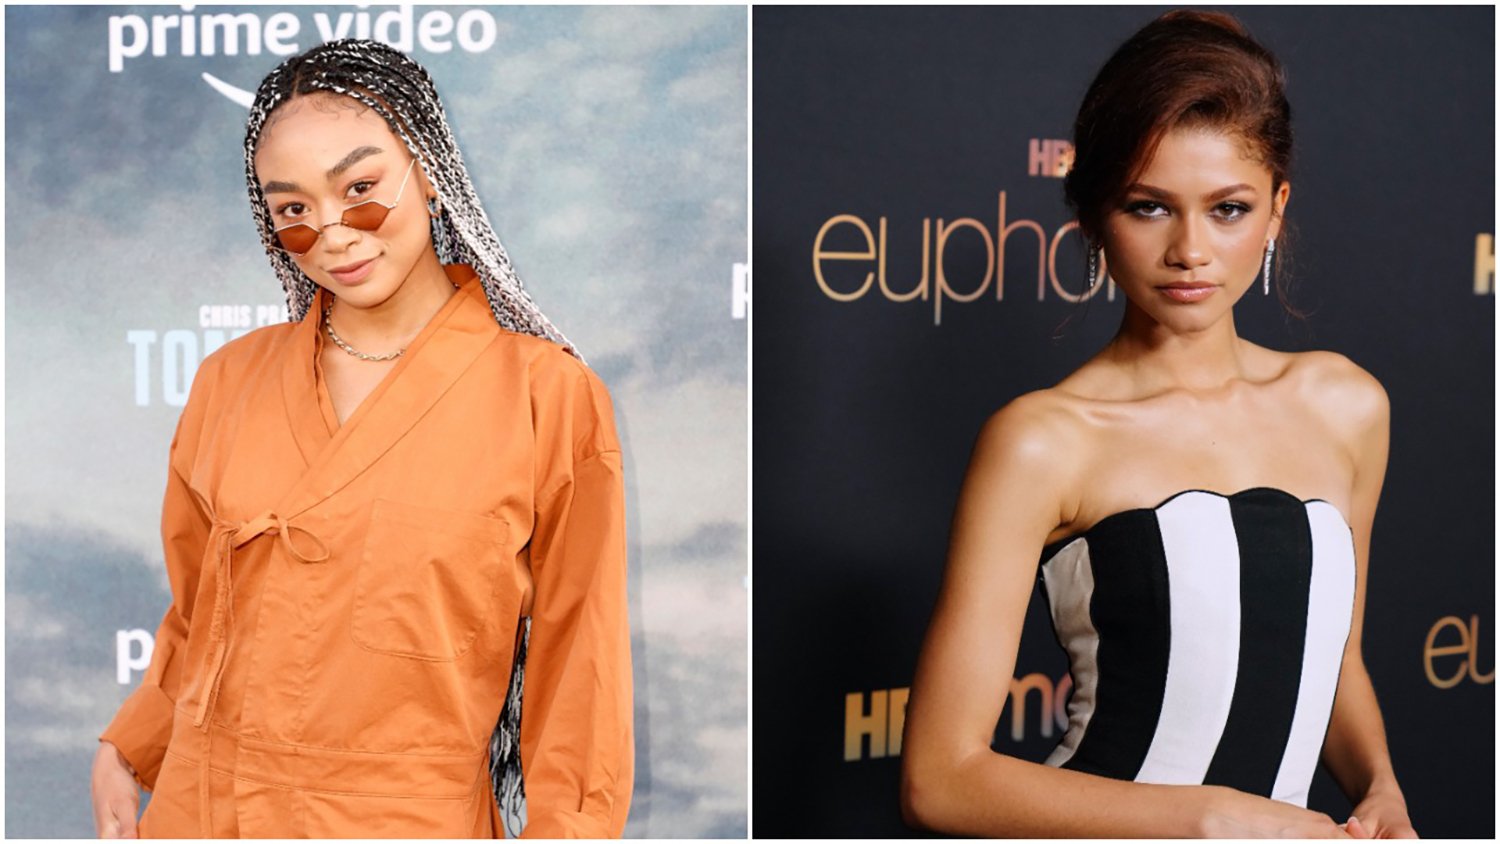 Zendaya Texted Tati Gabrielle While She Was Filming Uncharted